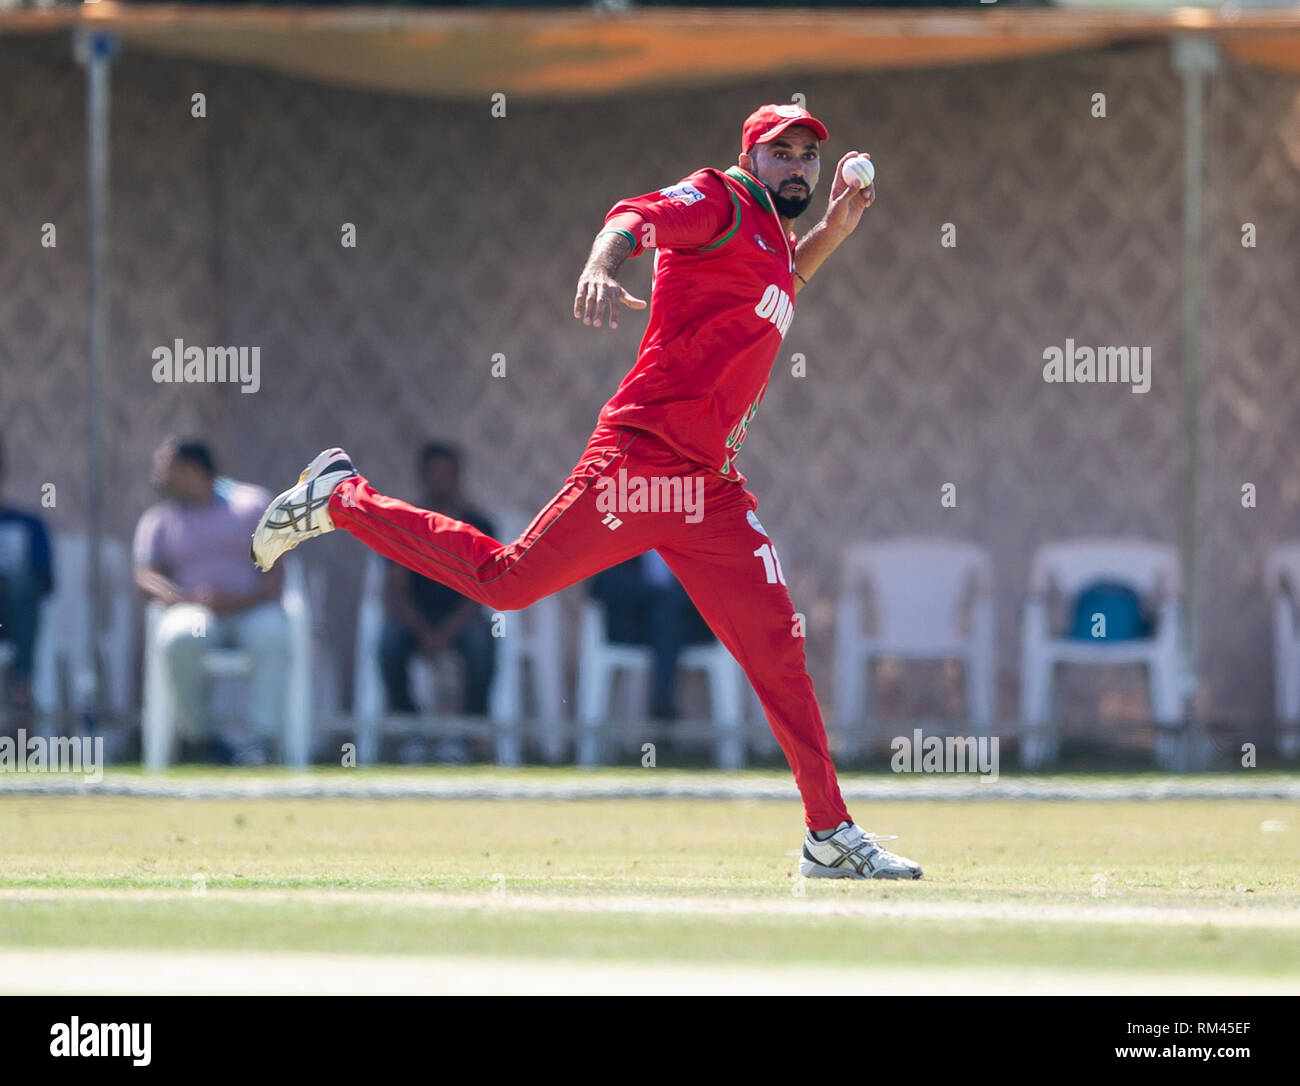 Muscat, Oman. 13th Feb, 2019. Pic shows: Great fielding by Oman's Bilal Khan, as Ireland take on Oman on the first day of the Oman Quadrangular Series. Credit: Ian Jacobs/Alamy Live News Stock Photo